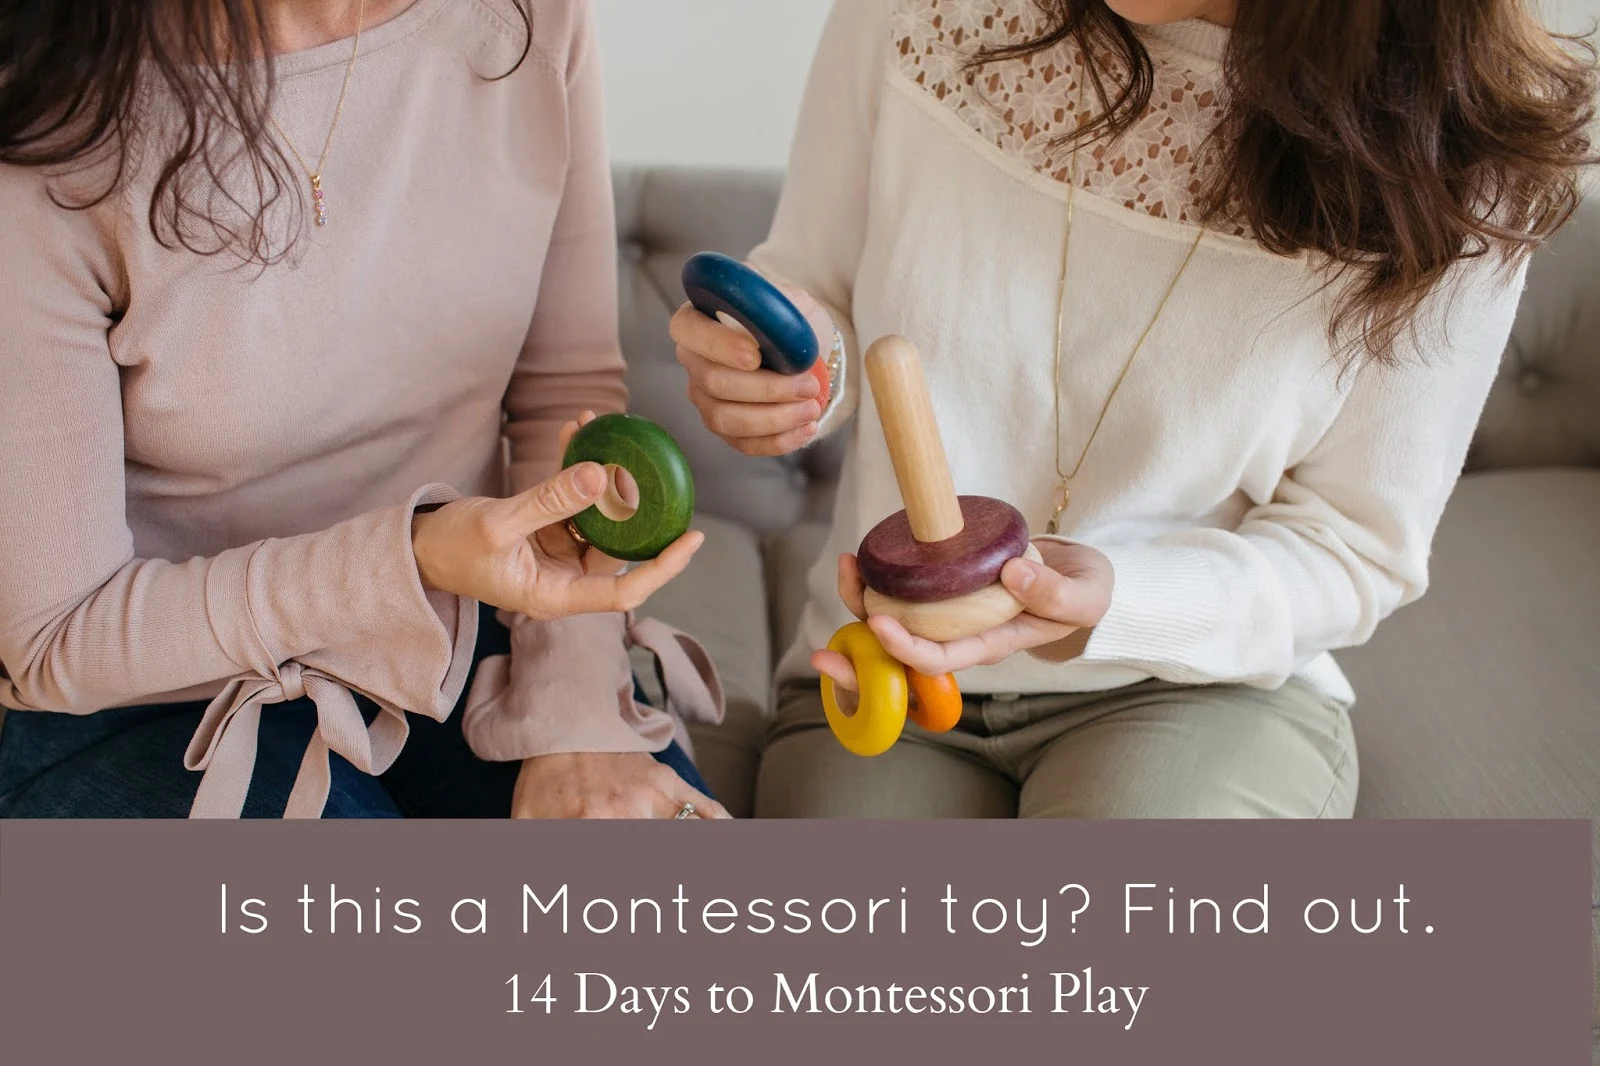 14 Days to Montessori Play is a parent's guide to better, more purposeful play! Come join to learn how to use Montessori's proven methods with your baby and toddler. 